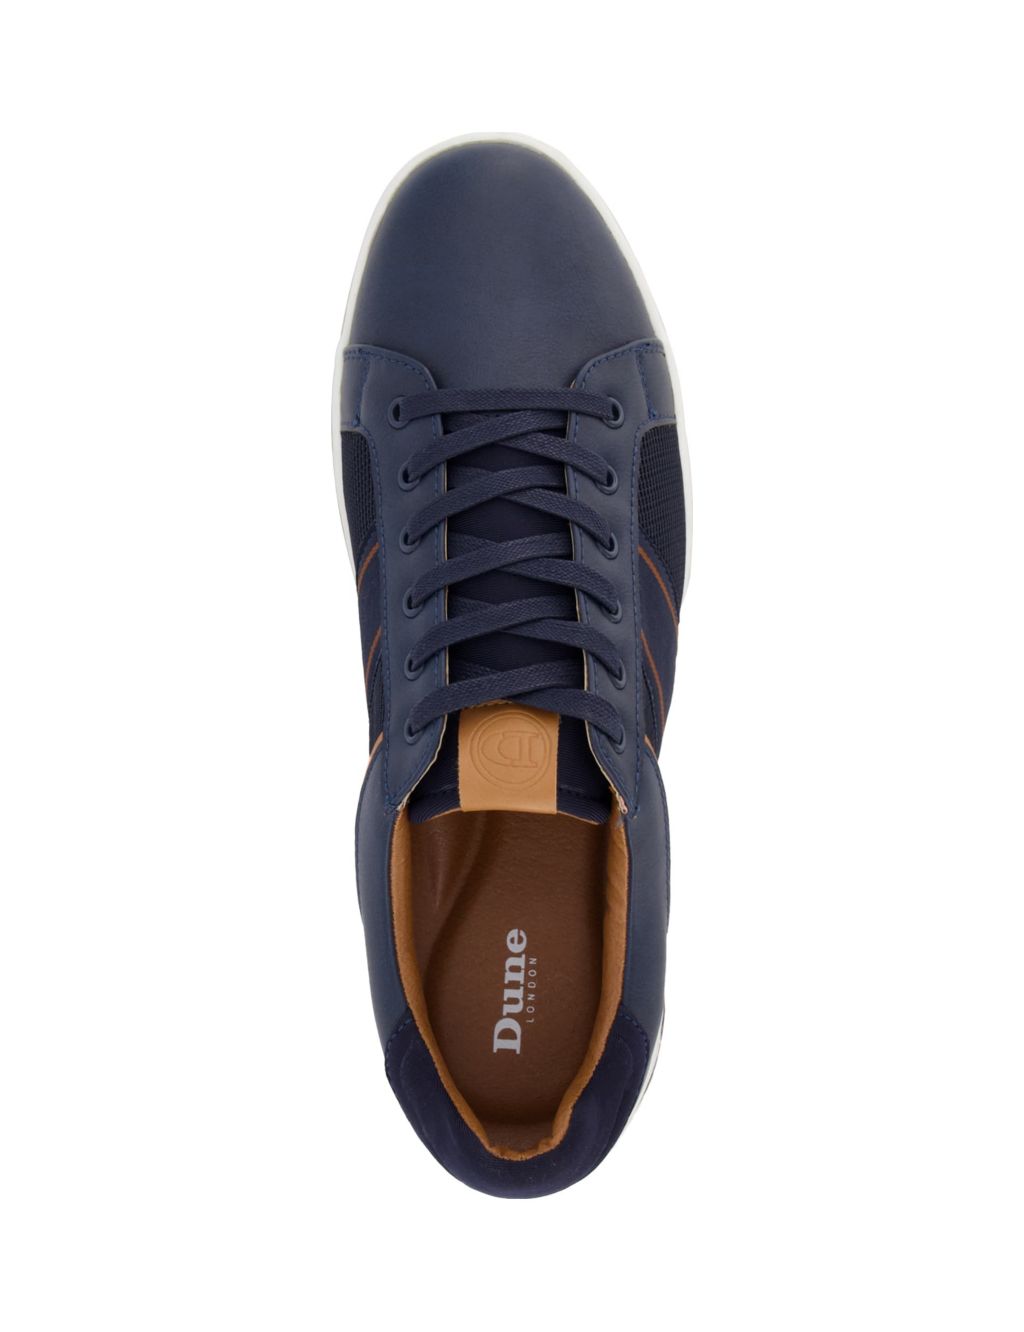 Stripe Lace up Trainers image 5